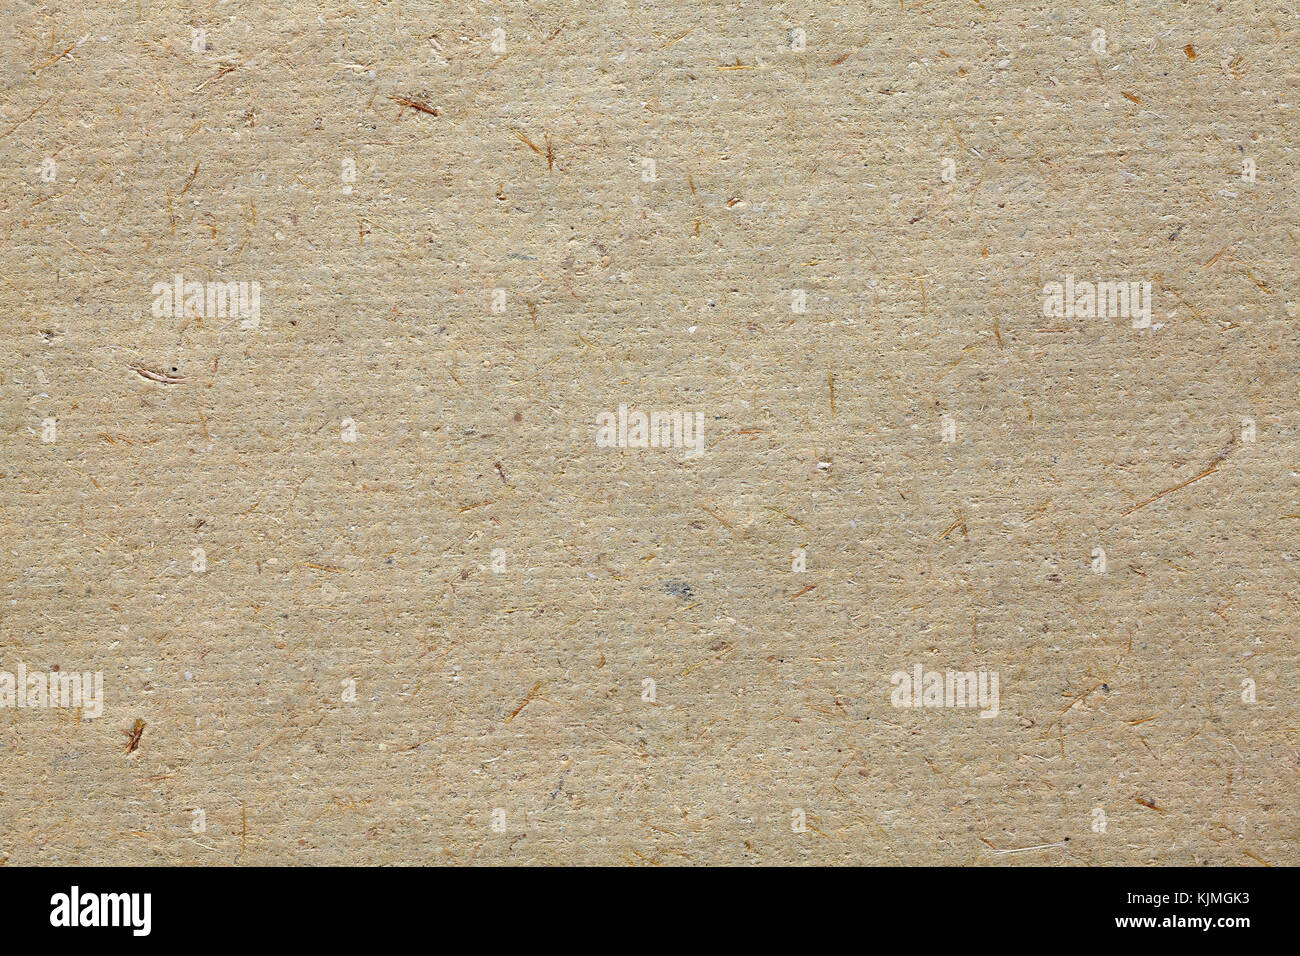 Handmade Paper Texture Stock Photo, Picture and Royalty Free Image. Image  8705853.